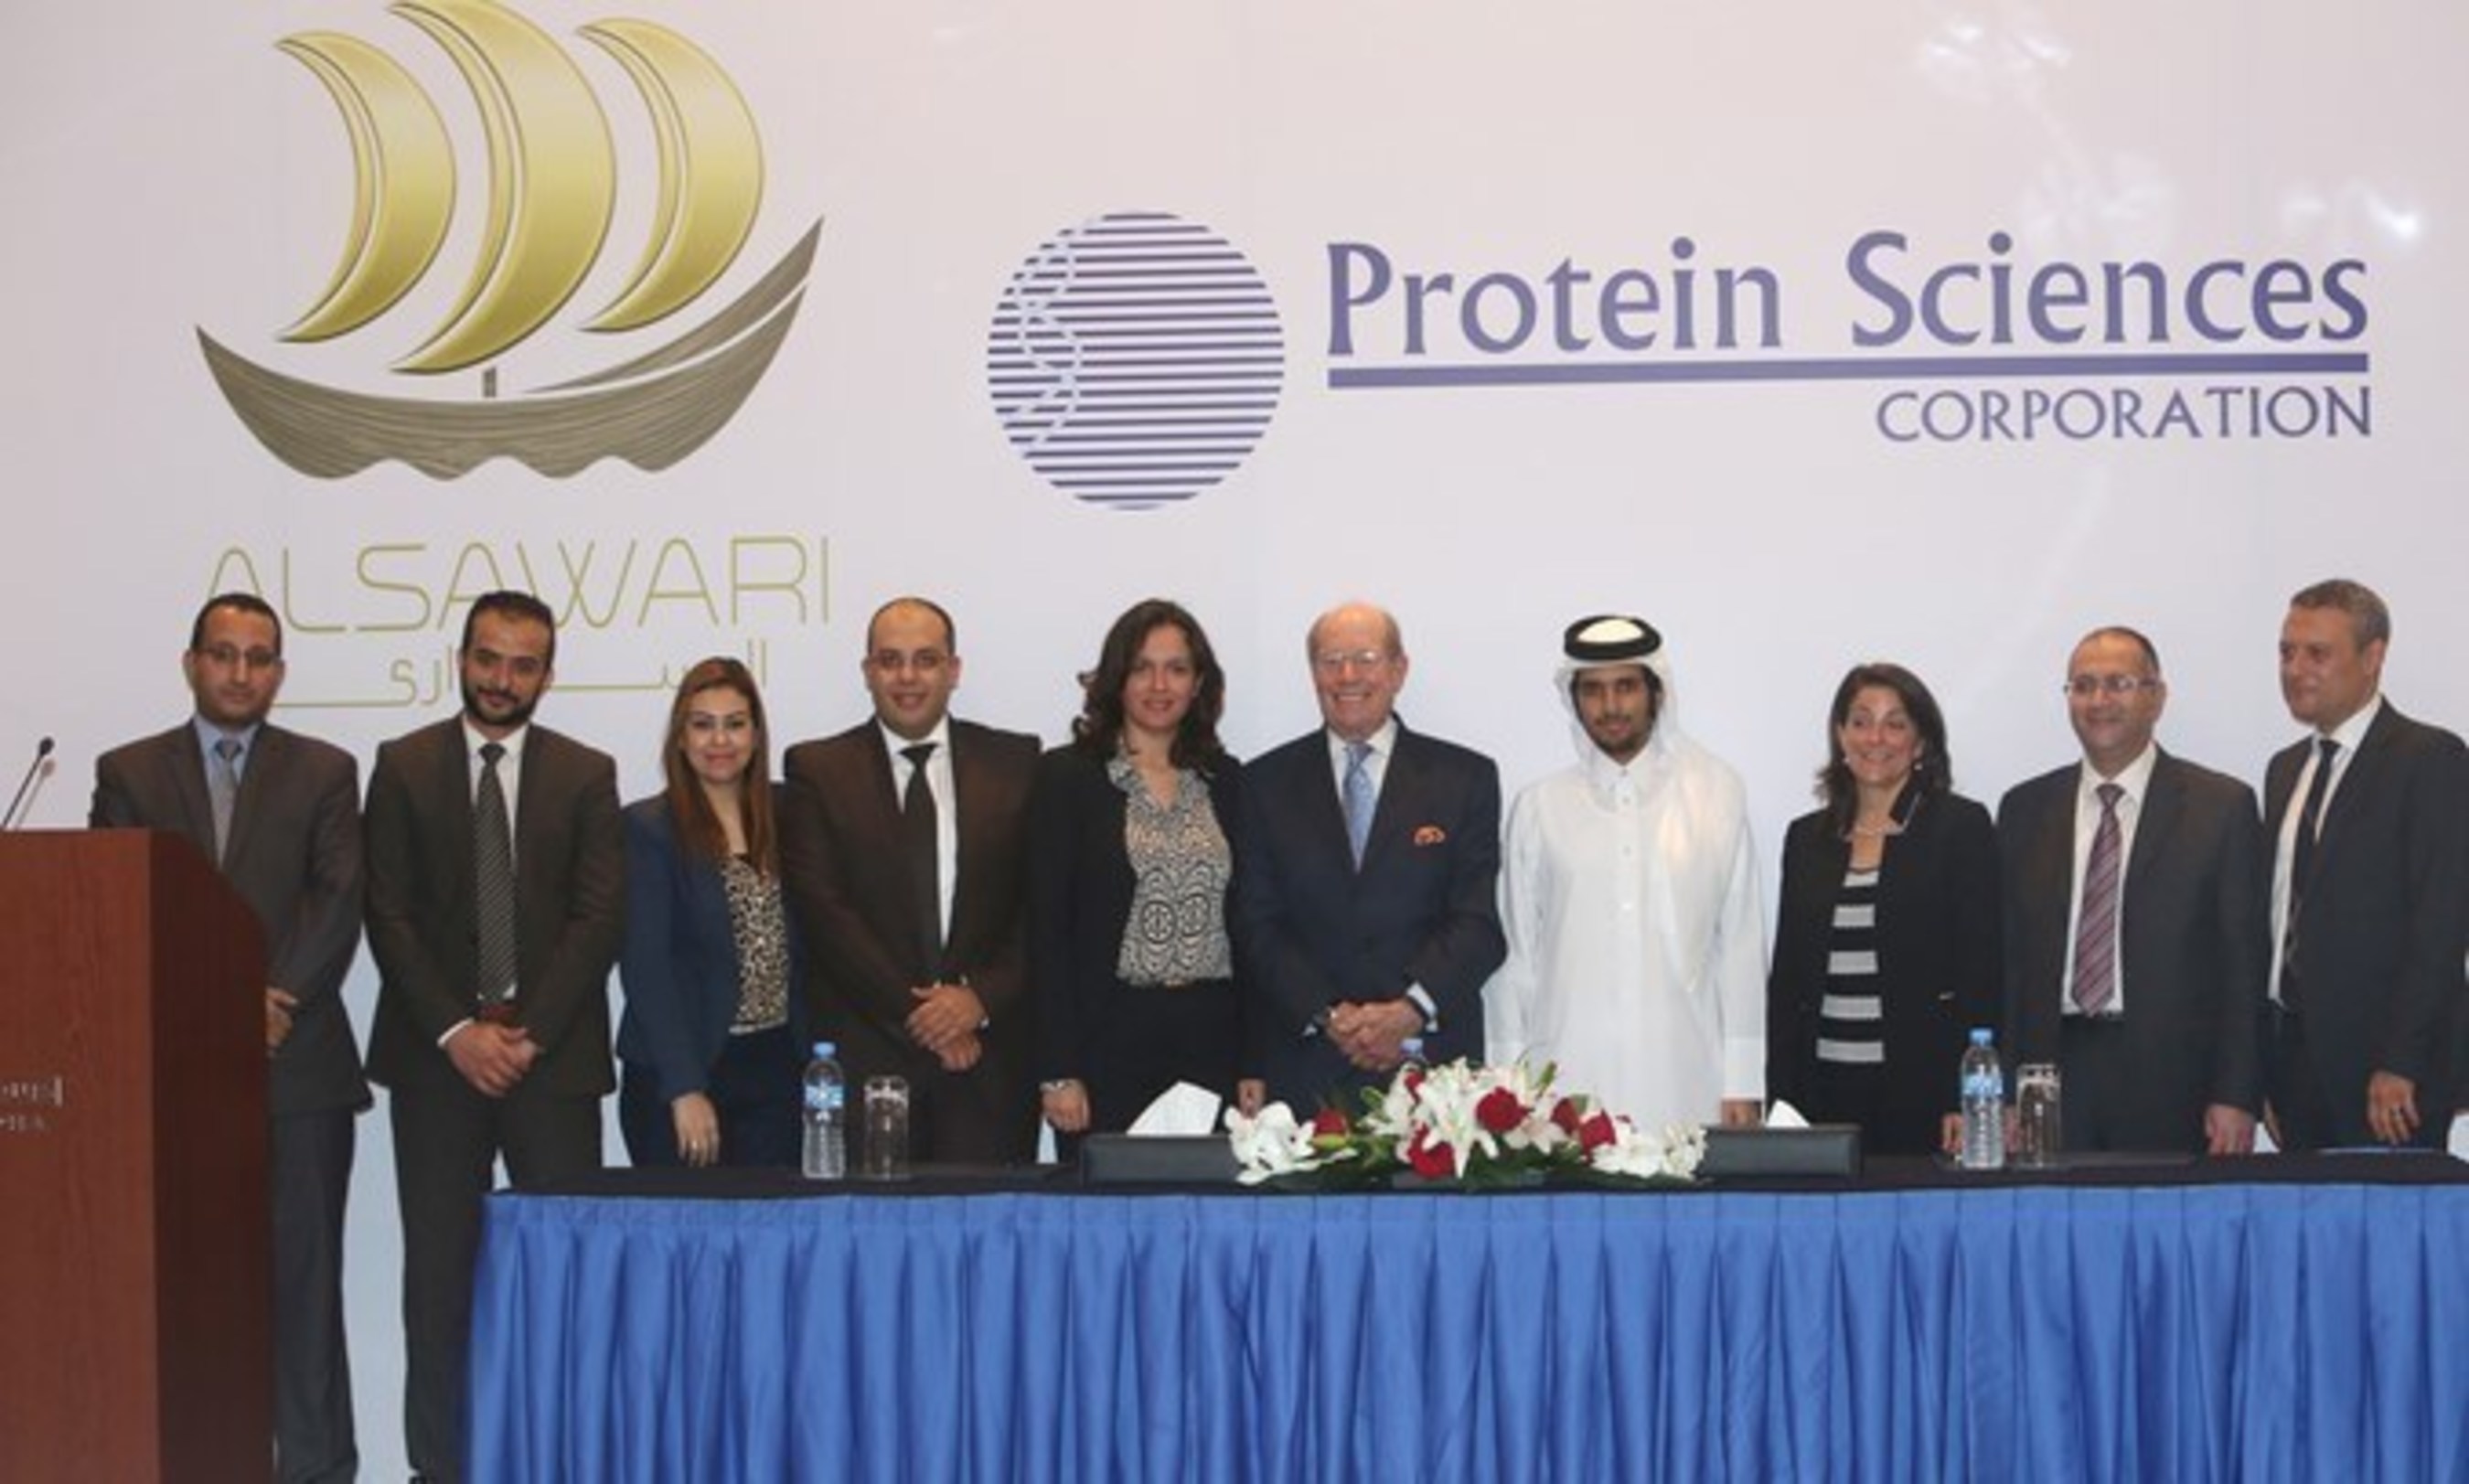 Members of Avanzcare join Daniel Adams, Executive Chairman of Protein Sciences (fifth from right) at a press conference in Doha, Qatar announcing their partnership. Also pictured are Sheikh Turki Bin Faisal al Thani, Chairman of Al Sawari Holding, (fourth from right), Her Excellency Dana Shell Smith, United States Ambassador to Qatar (third from right), John Youssef, General Manager of Avanzcare (second from right) and Mohammed Shafiek, Al Sawari Holding Managing Director (right)